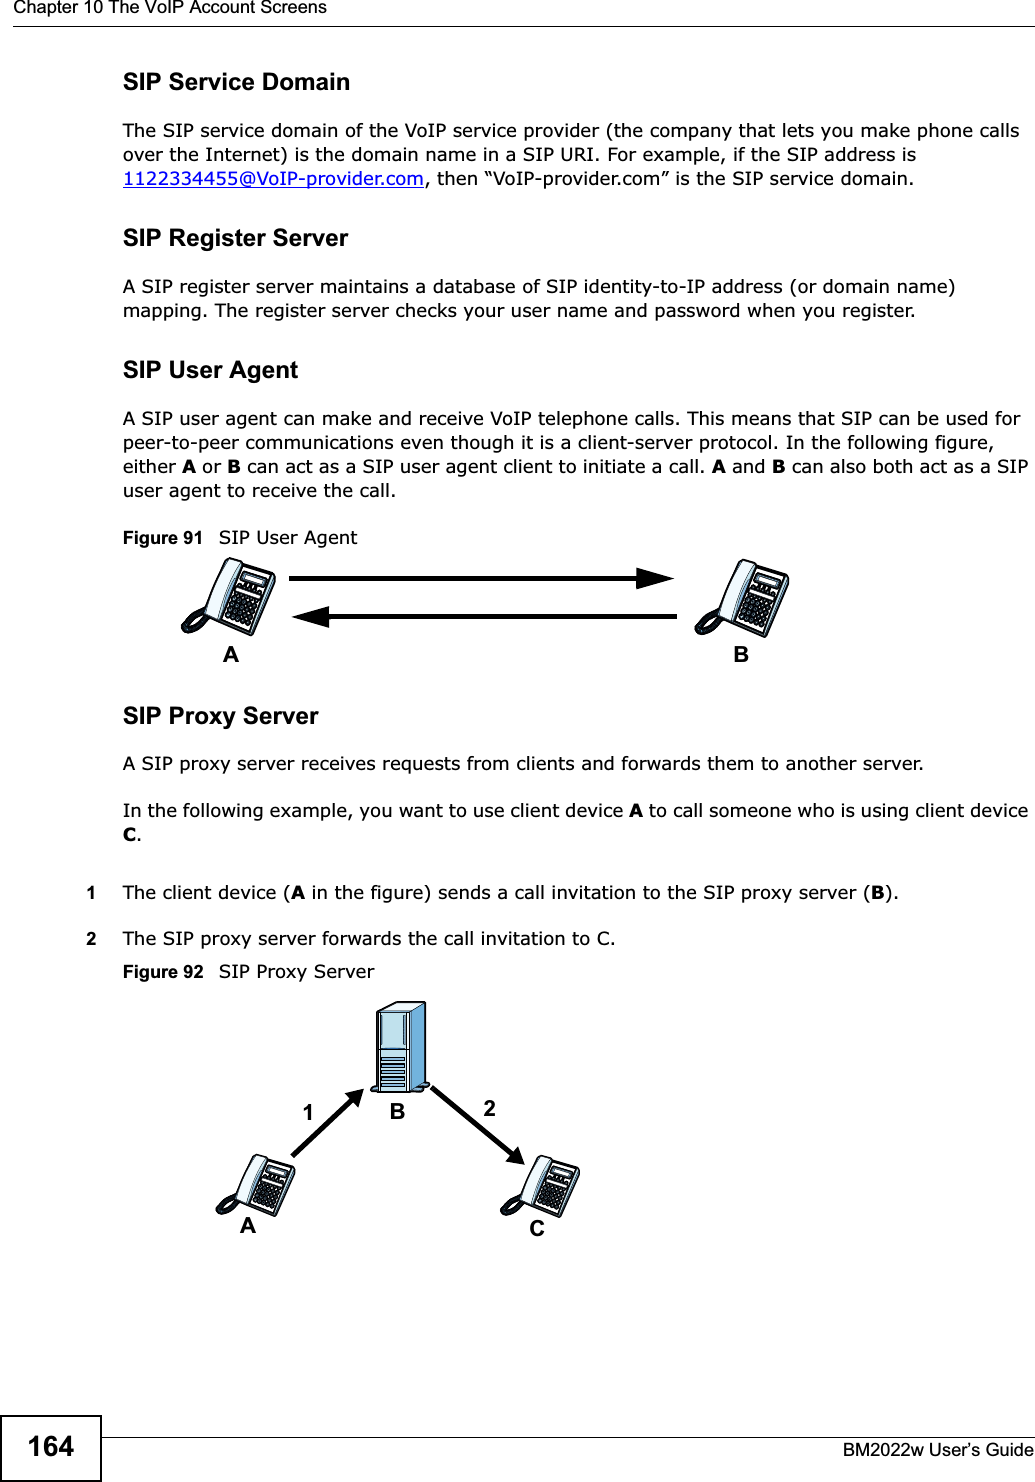 Chapter 10 The VoIP Account ScreensBM2022w User’s Guide164SIP Service DomainThe SIP service domain of the VoIP service provider (the company that lets you make phone calls over the Internet) is the domain name in a SIP URI. For example, if the SIP address is 1122334455@VoIP-provider.com, then “VoIP-provider.com” is the SIP service domain.SIP Register ServerA SIP register server maintains a database of SIP identity-to-IP address (or domain name) mapping. The register server checks your user name and password when you register. SIP User AgentA SIP user agent can make and receive VoIP telephone calls. This means that SIP can be used for peer-to-peer communications even though it is a client-server protocol. In the following figure, either A or B can act as a SIP user agent client to initiate a call. A and B can also both act as a SIP user agent to receive the call.Figure 91   SIP User AgentSIP Proxy ServerA SIP proxy server receives requests from clients and forwards them to another server.In the following example, you want to use client device A to call someone who is using client device C.1The client device (A in the figure) sends a call invitation to the SIP proxy server (B).2The SIP proxy server forwards the call invitation to C.Figure 92   SIP Proxy ServerABACB12